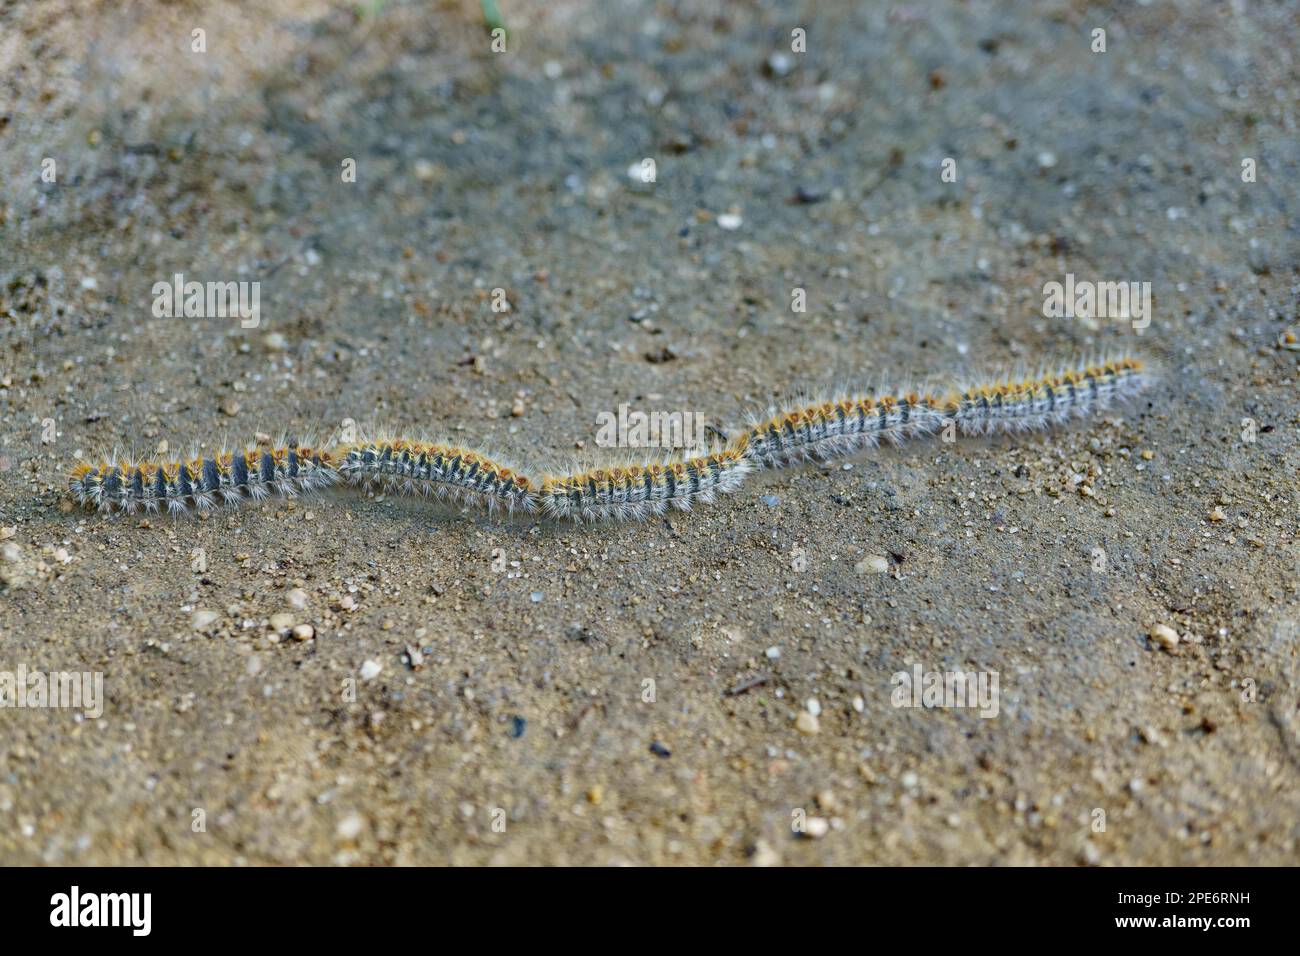 Group of processionary caterpillars in a row dangerous pest for animals and plants Stock Photo